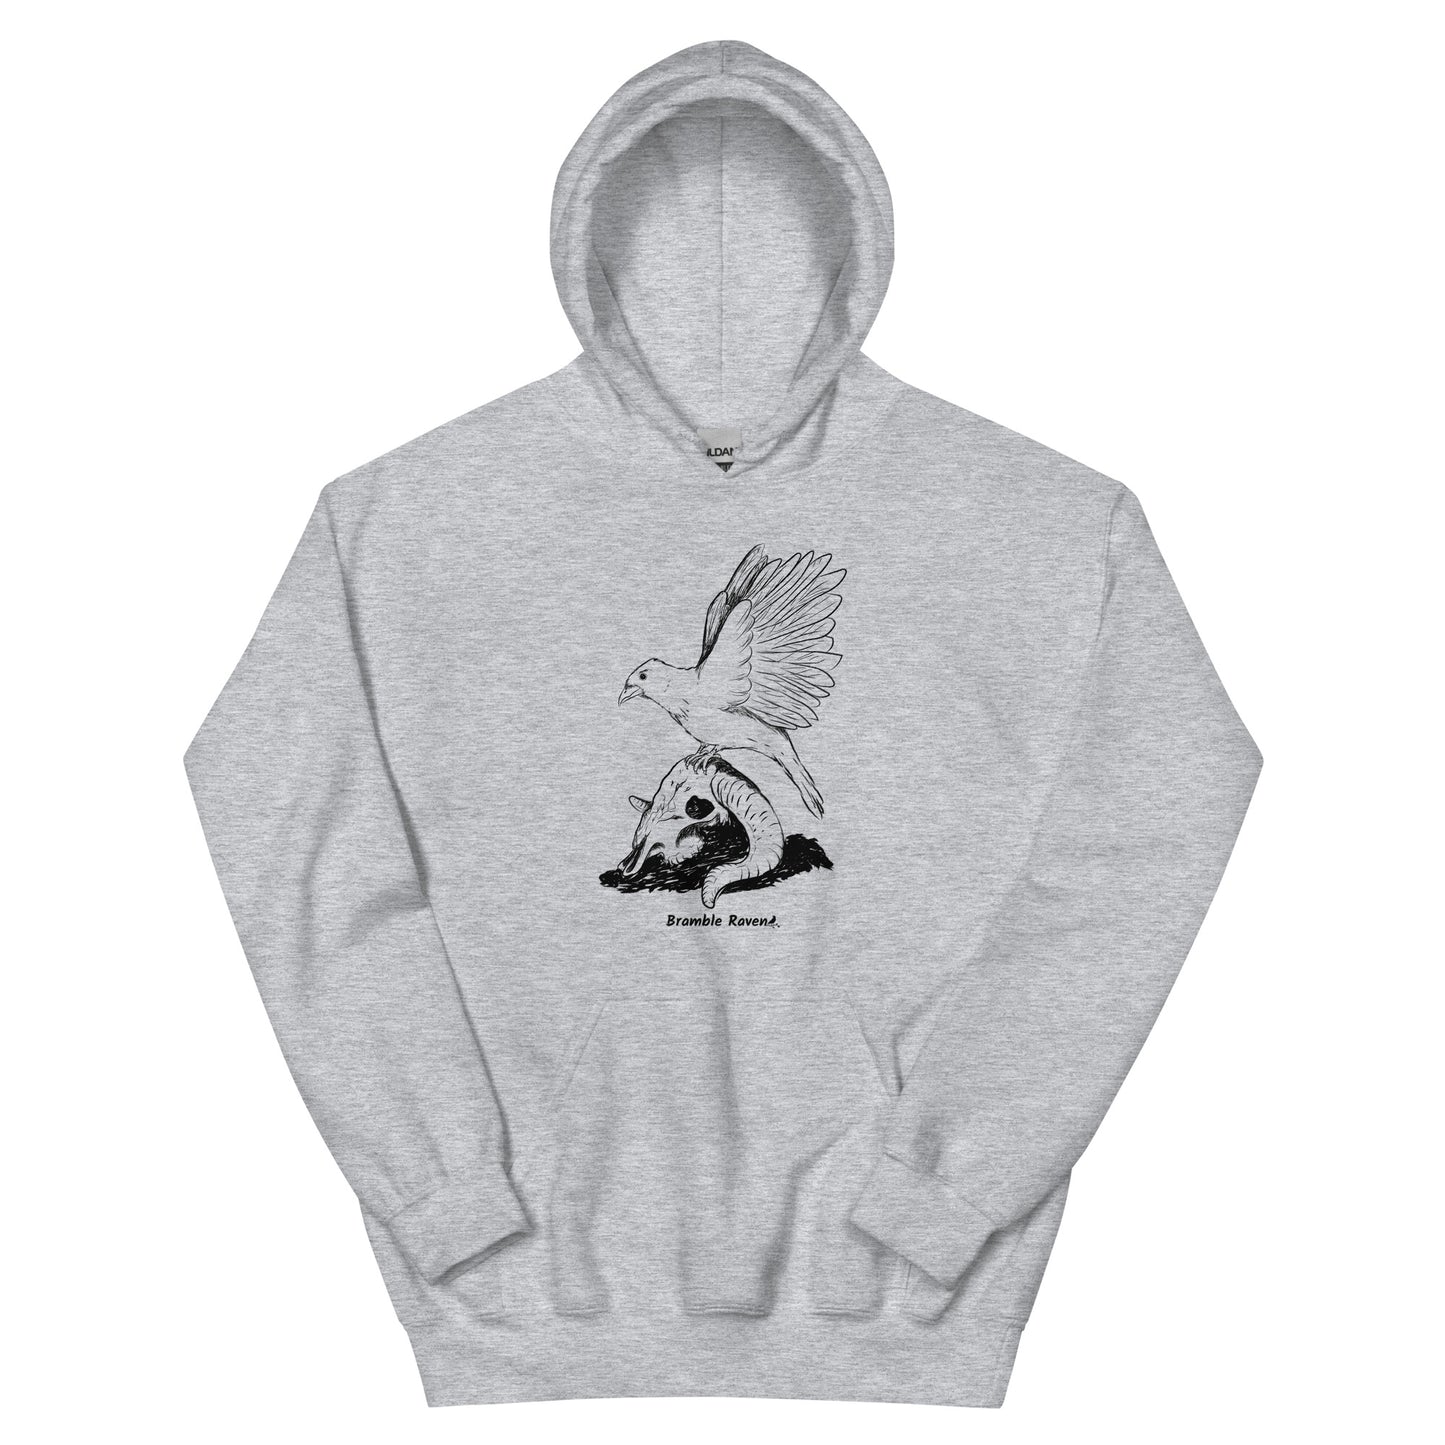 Sport grey colored unisex Reflections hoodie. Features image of a crow with wings outstretched sitting on a sheep skull.  Has a front pouch pocket and double lined hood.